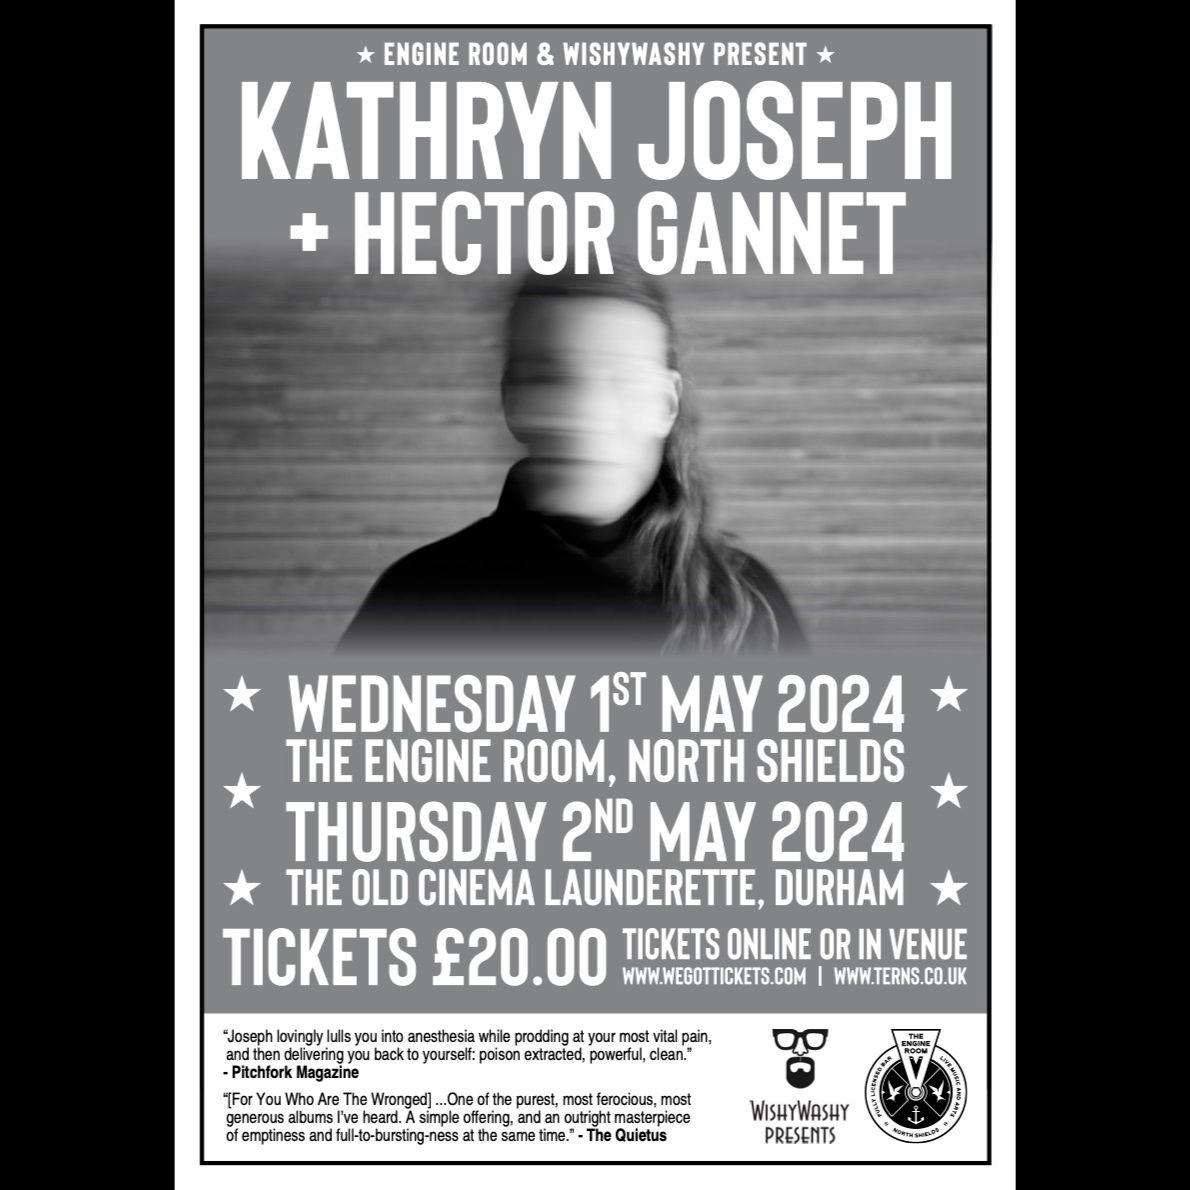 So happy to announce this! I'll be opening for the brilliant @kathrynjoseph_ at @TERNSVenue North Shields on 01/05, and at Old Cinema Laundrette, Durham on 02/05! First airing for some new songs I've been working on too. @MrWishyWashy On-sale NOW: hectorgannet.com 🎟